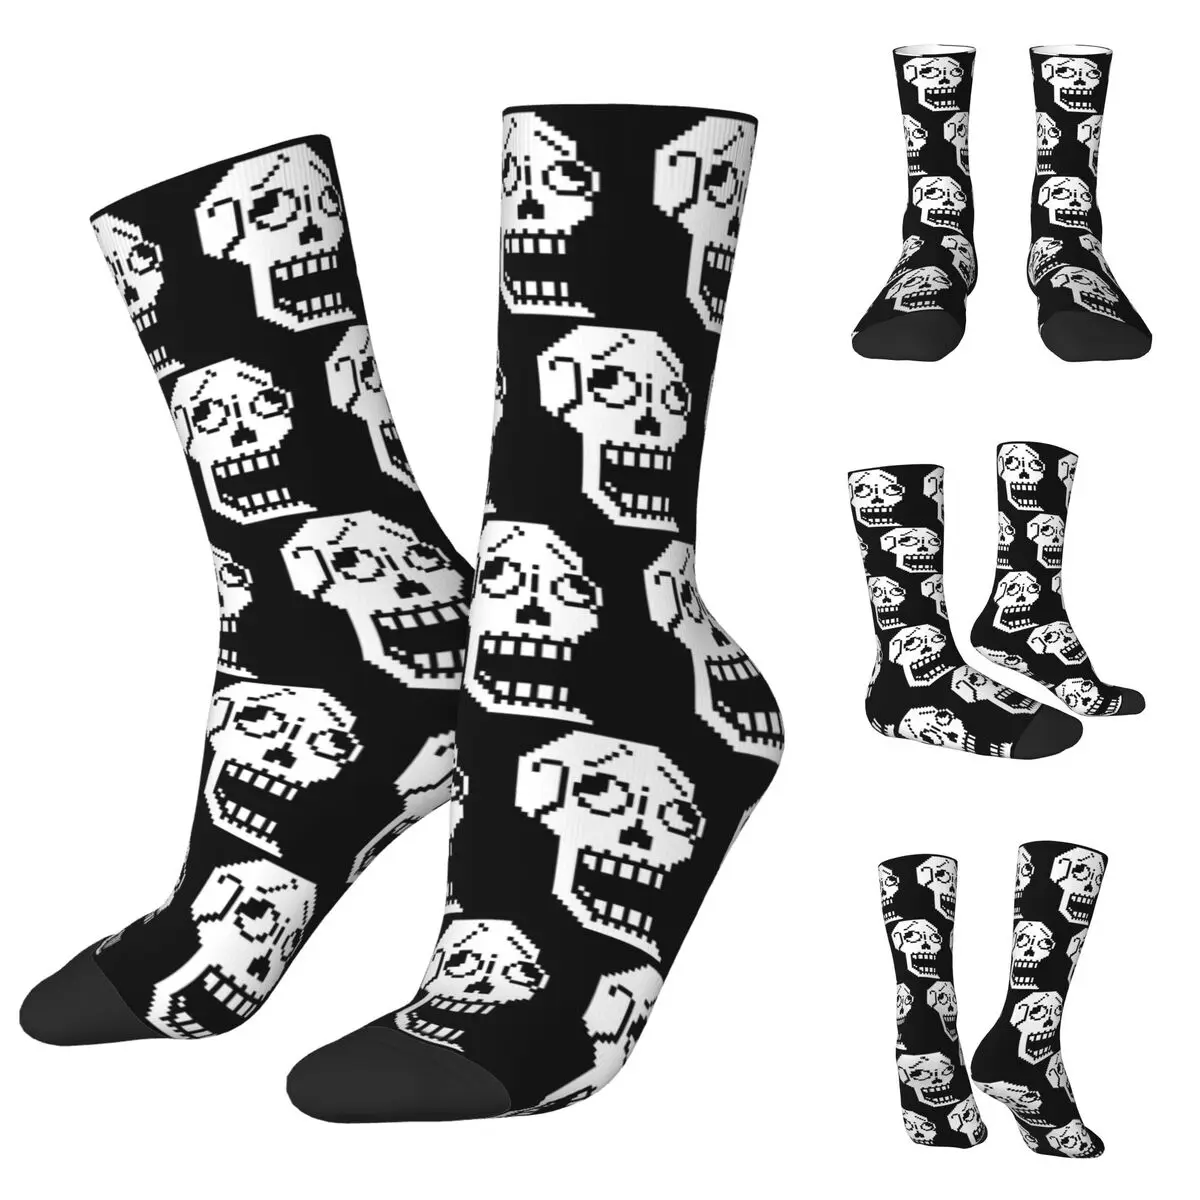 Sans And Papyrus Sprites Undertale Napstablook Men and Women printing Socks,Windproof Applicable throughout the year applicable to ht400 desktop extruder 3d printing consumables extruder 3dpany